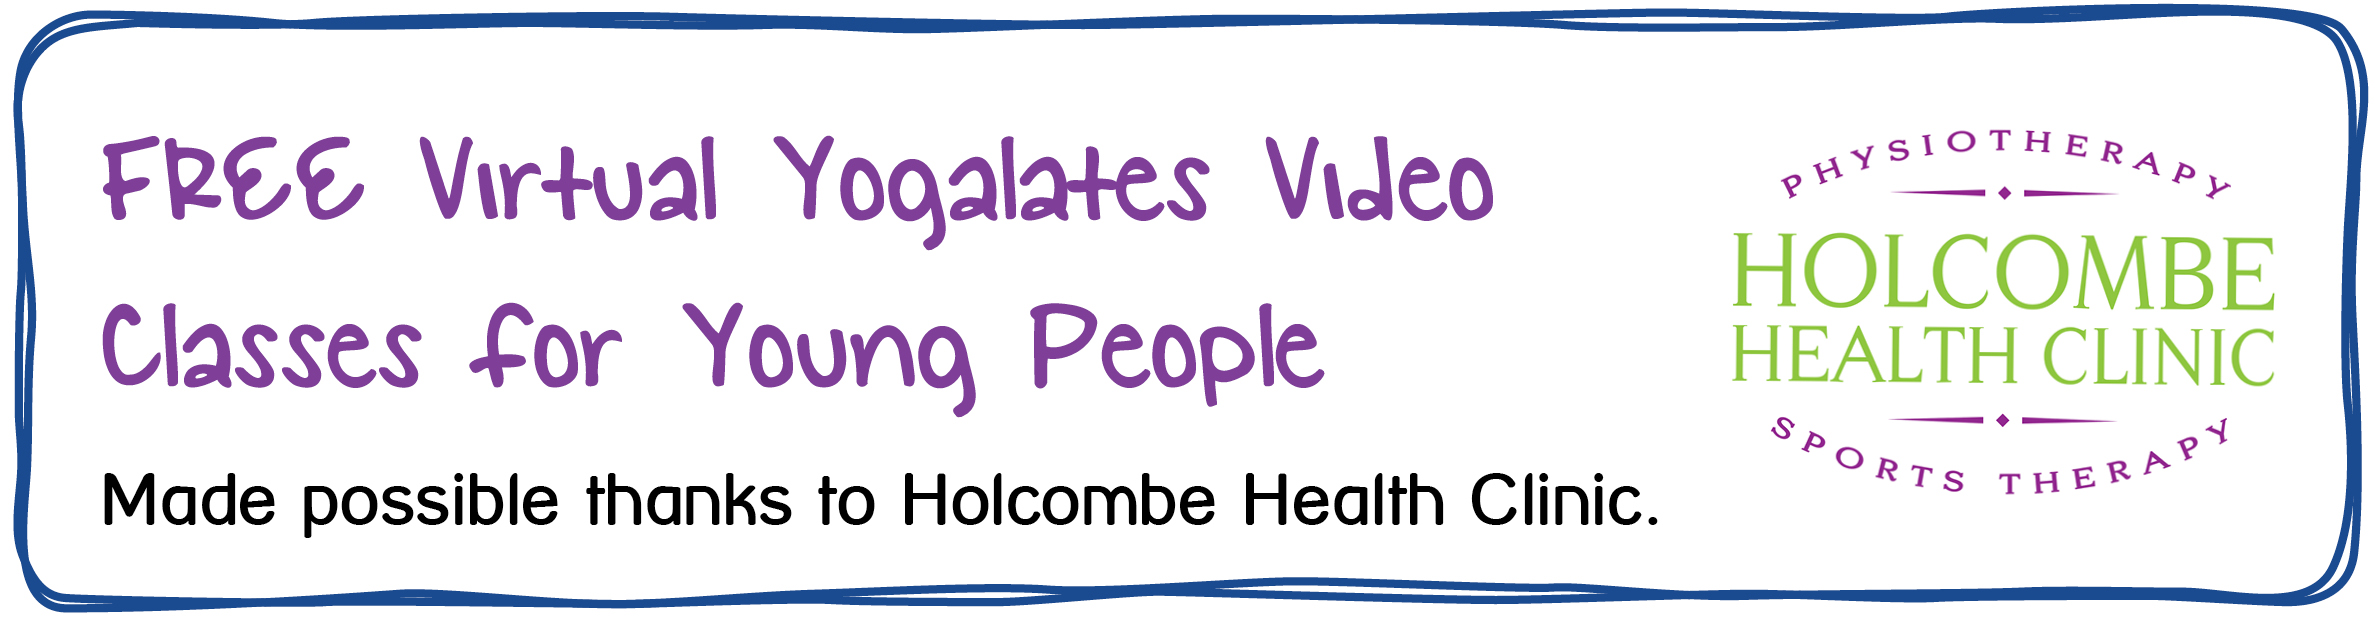 FREE Virtual Yogalates Video Classes for Young People. Made possible thanks to Holcombe Health Clinic.